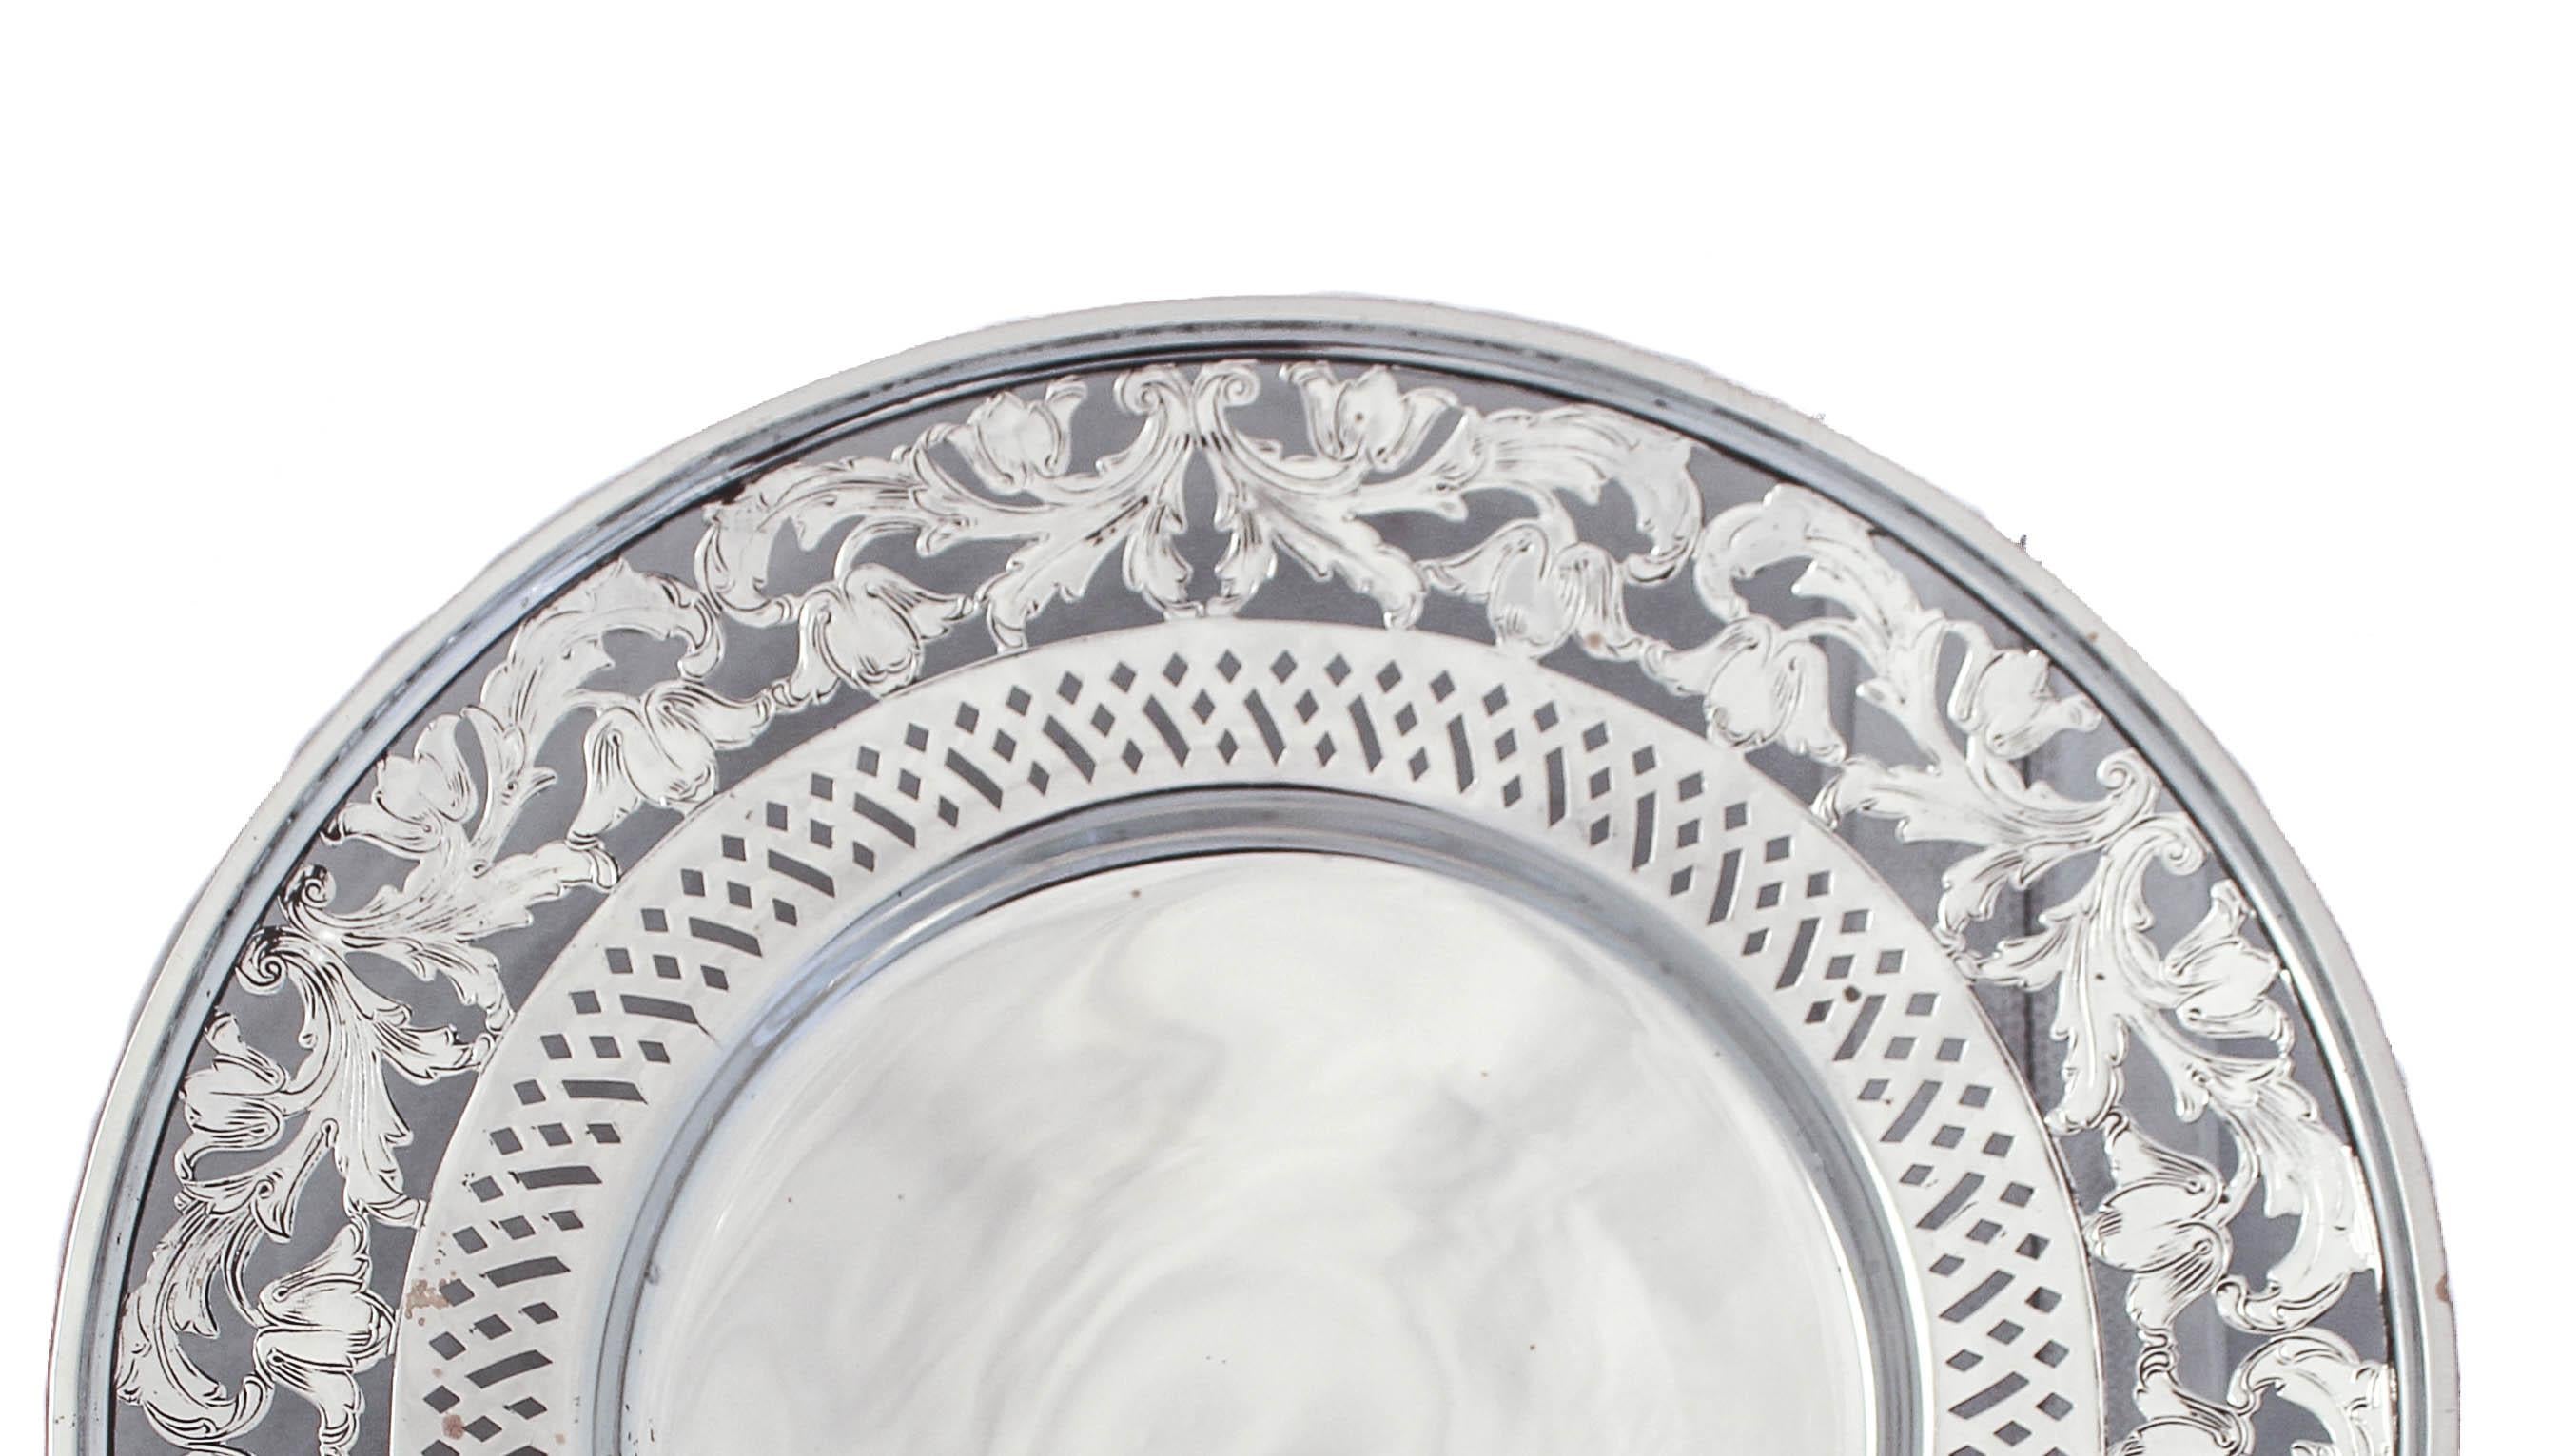 Delighted to offer this sterling silver dish on a pedestal by the Webster Silver Company. It has a lovely floral cutout design approximately one inch wide going around the edge. Around the inner-center there is a geometric cutout pattern. It stands